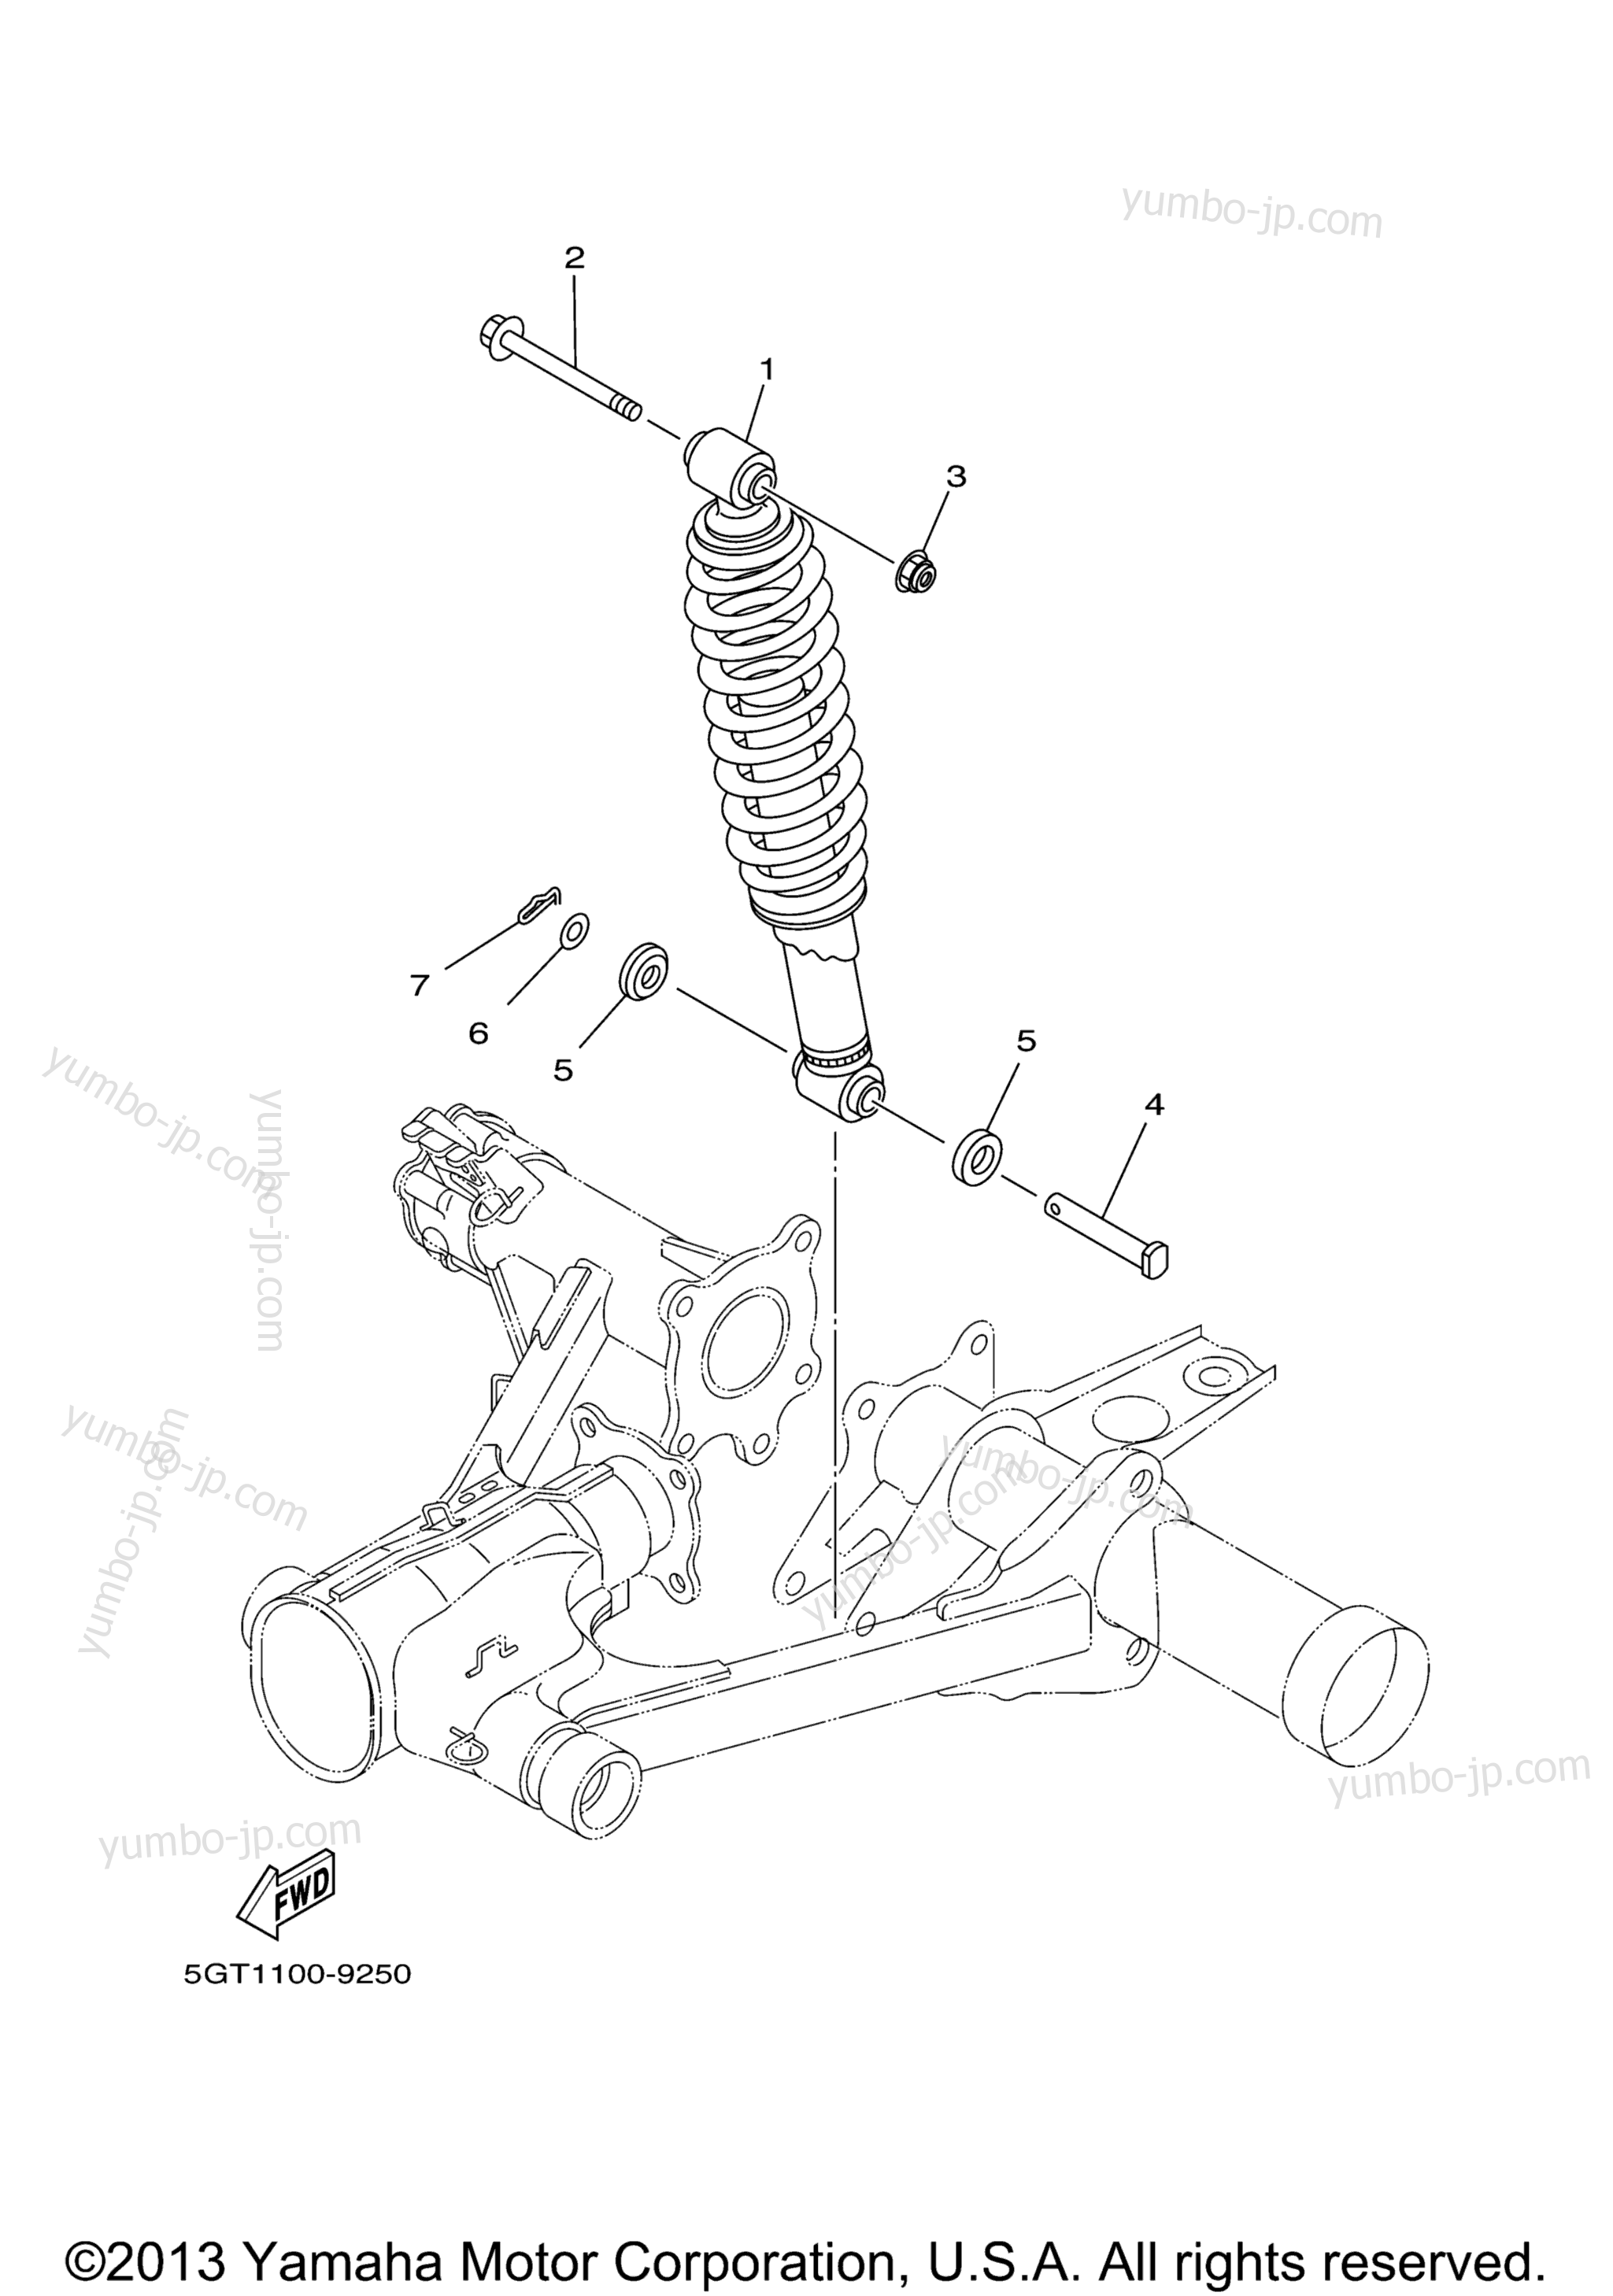 Rear Suspension for ATVs YAMAHA GRIZZLY REALTREE HUNTER (YFM600FHN) 2001 year